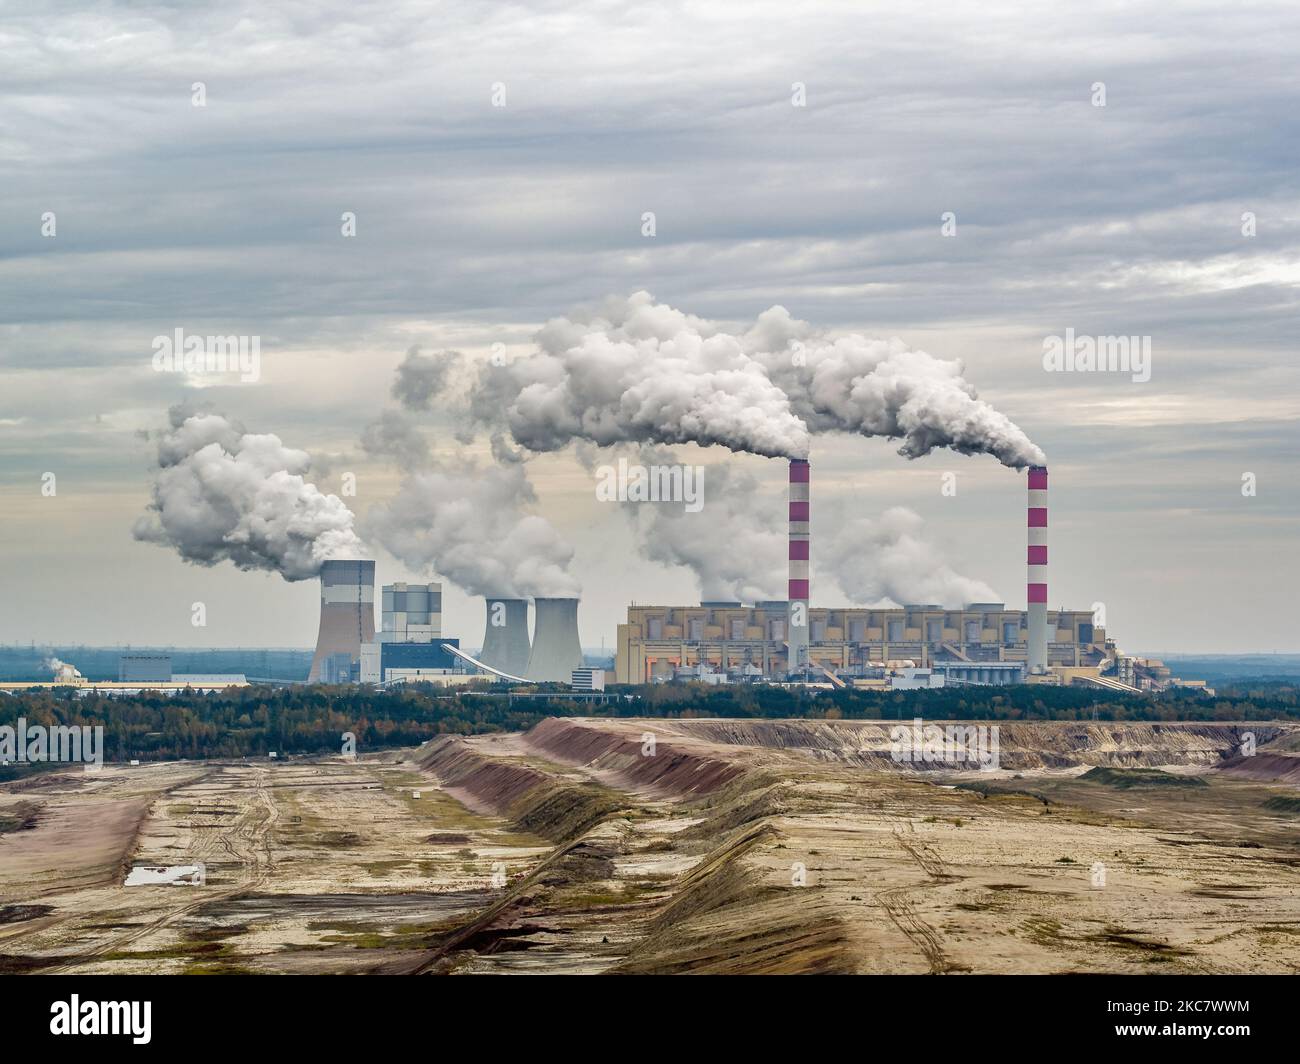 Aerial view of power plant and open-cast coal mine in Belchatow under moody cloudy sky, Poland Stock Photo